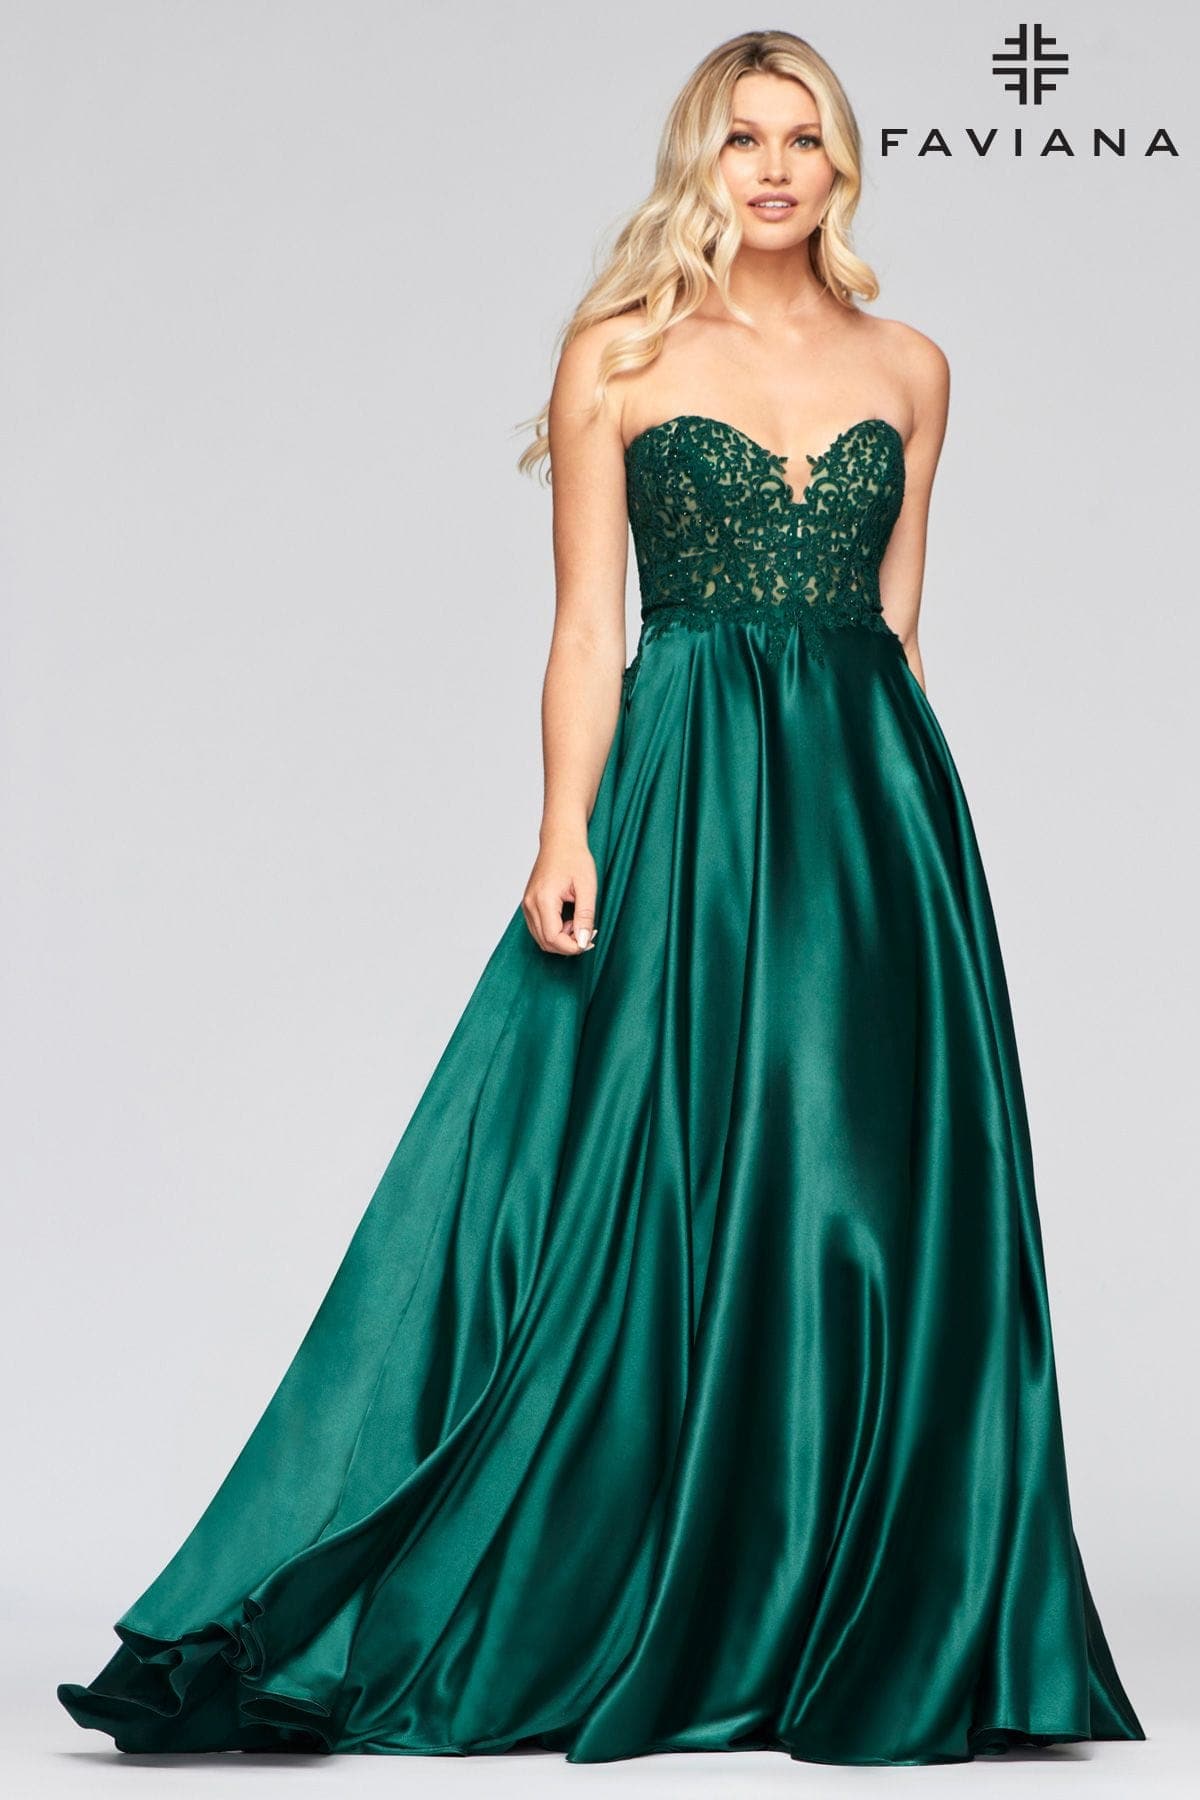 Strapless Ballgown Sweetheart Prom Dress With Lace And Charmeuse